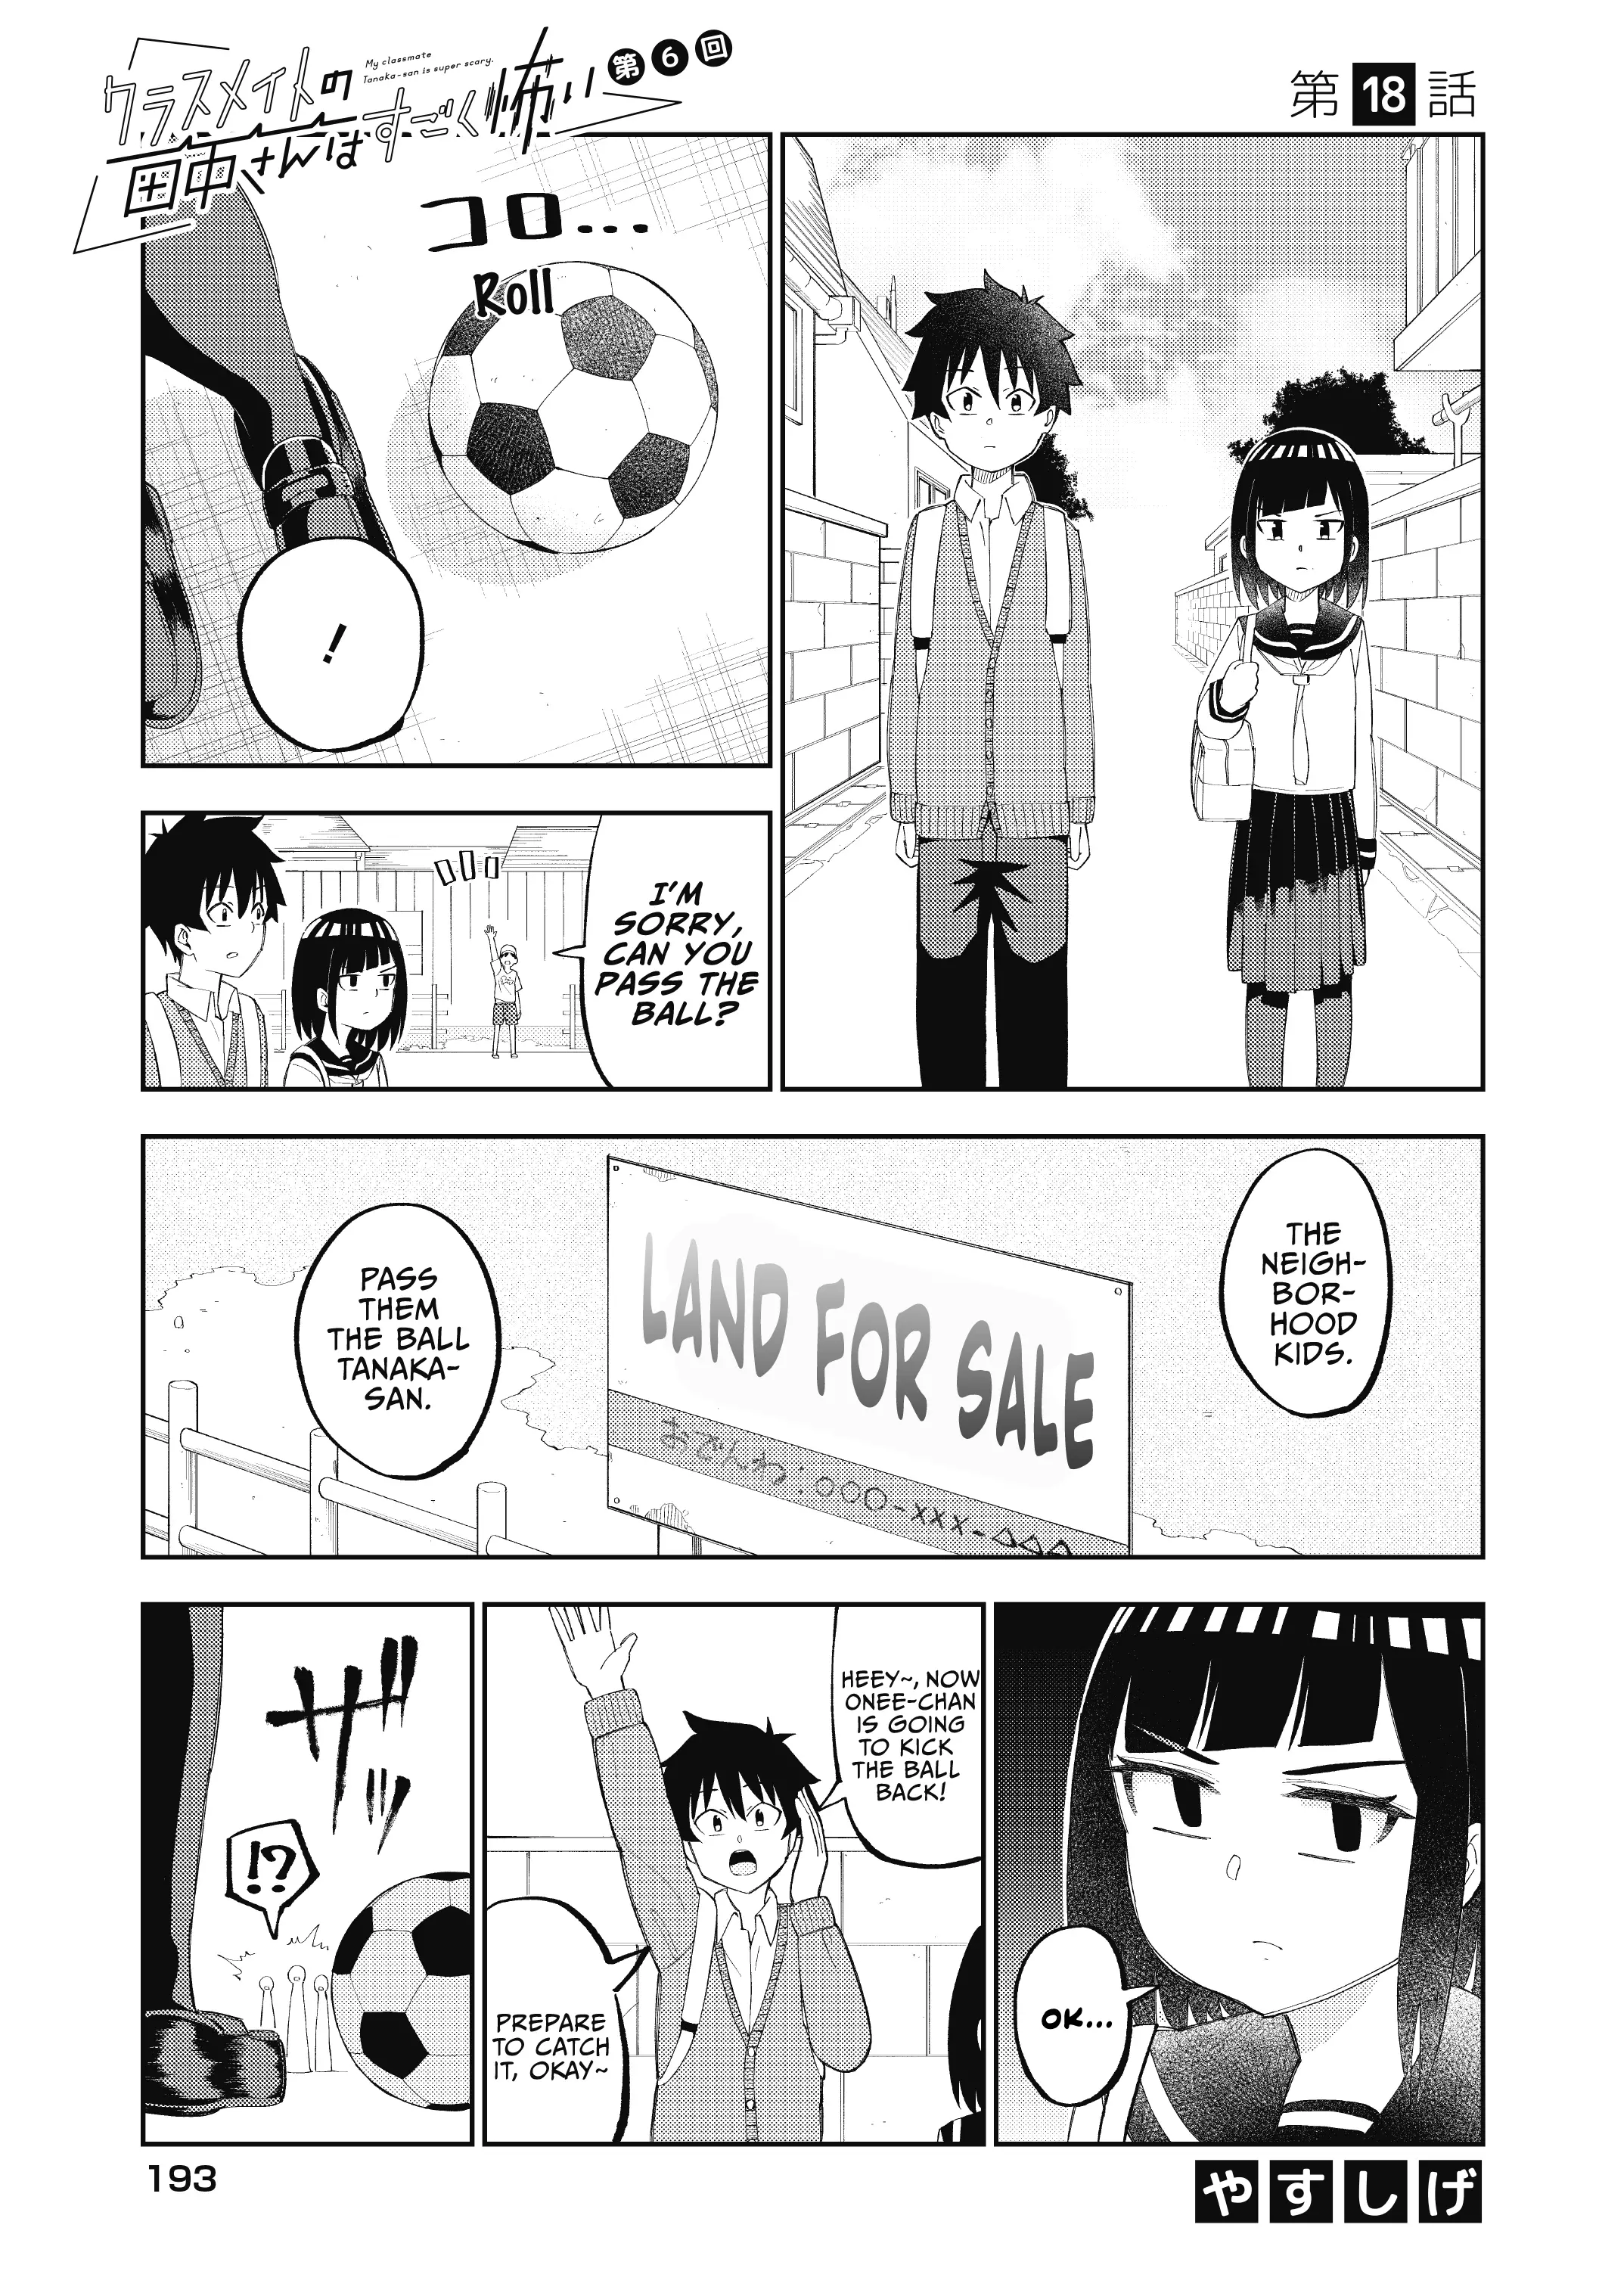 My Classmate Tanaka-San Is Super Scary - 18 page 2